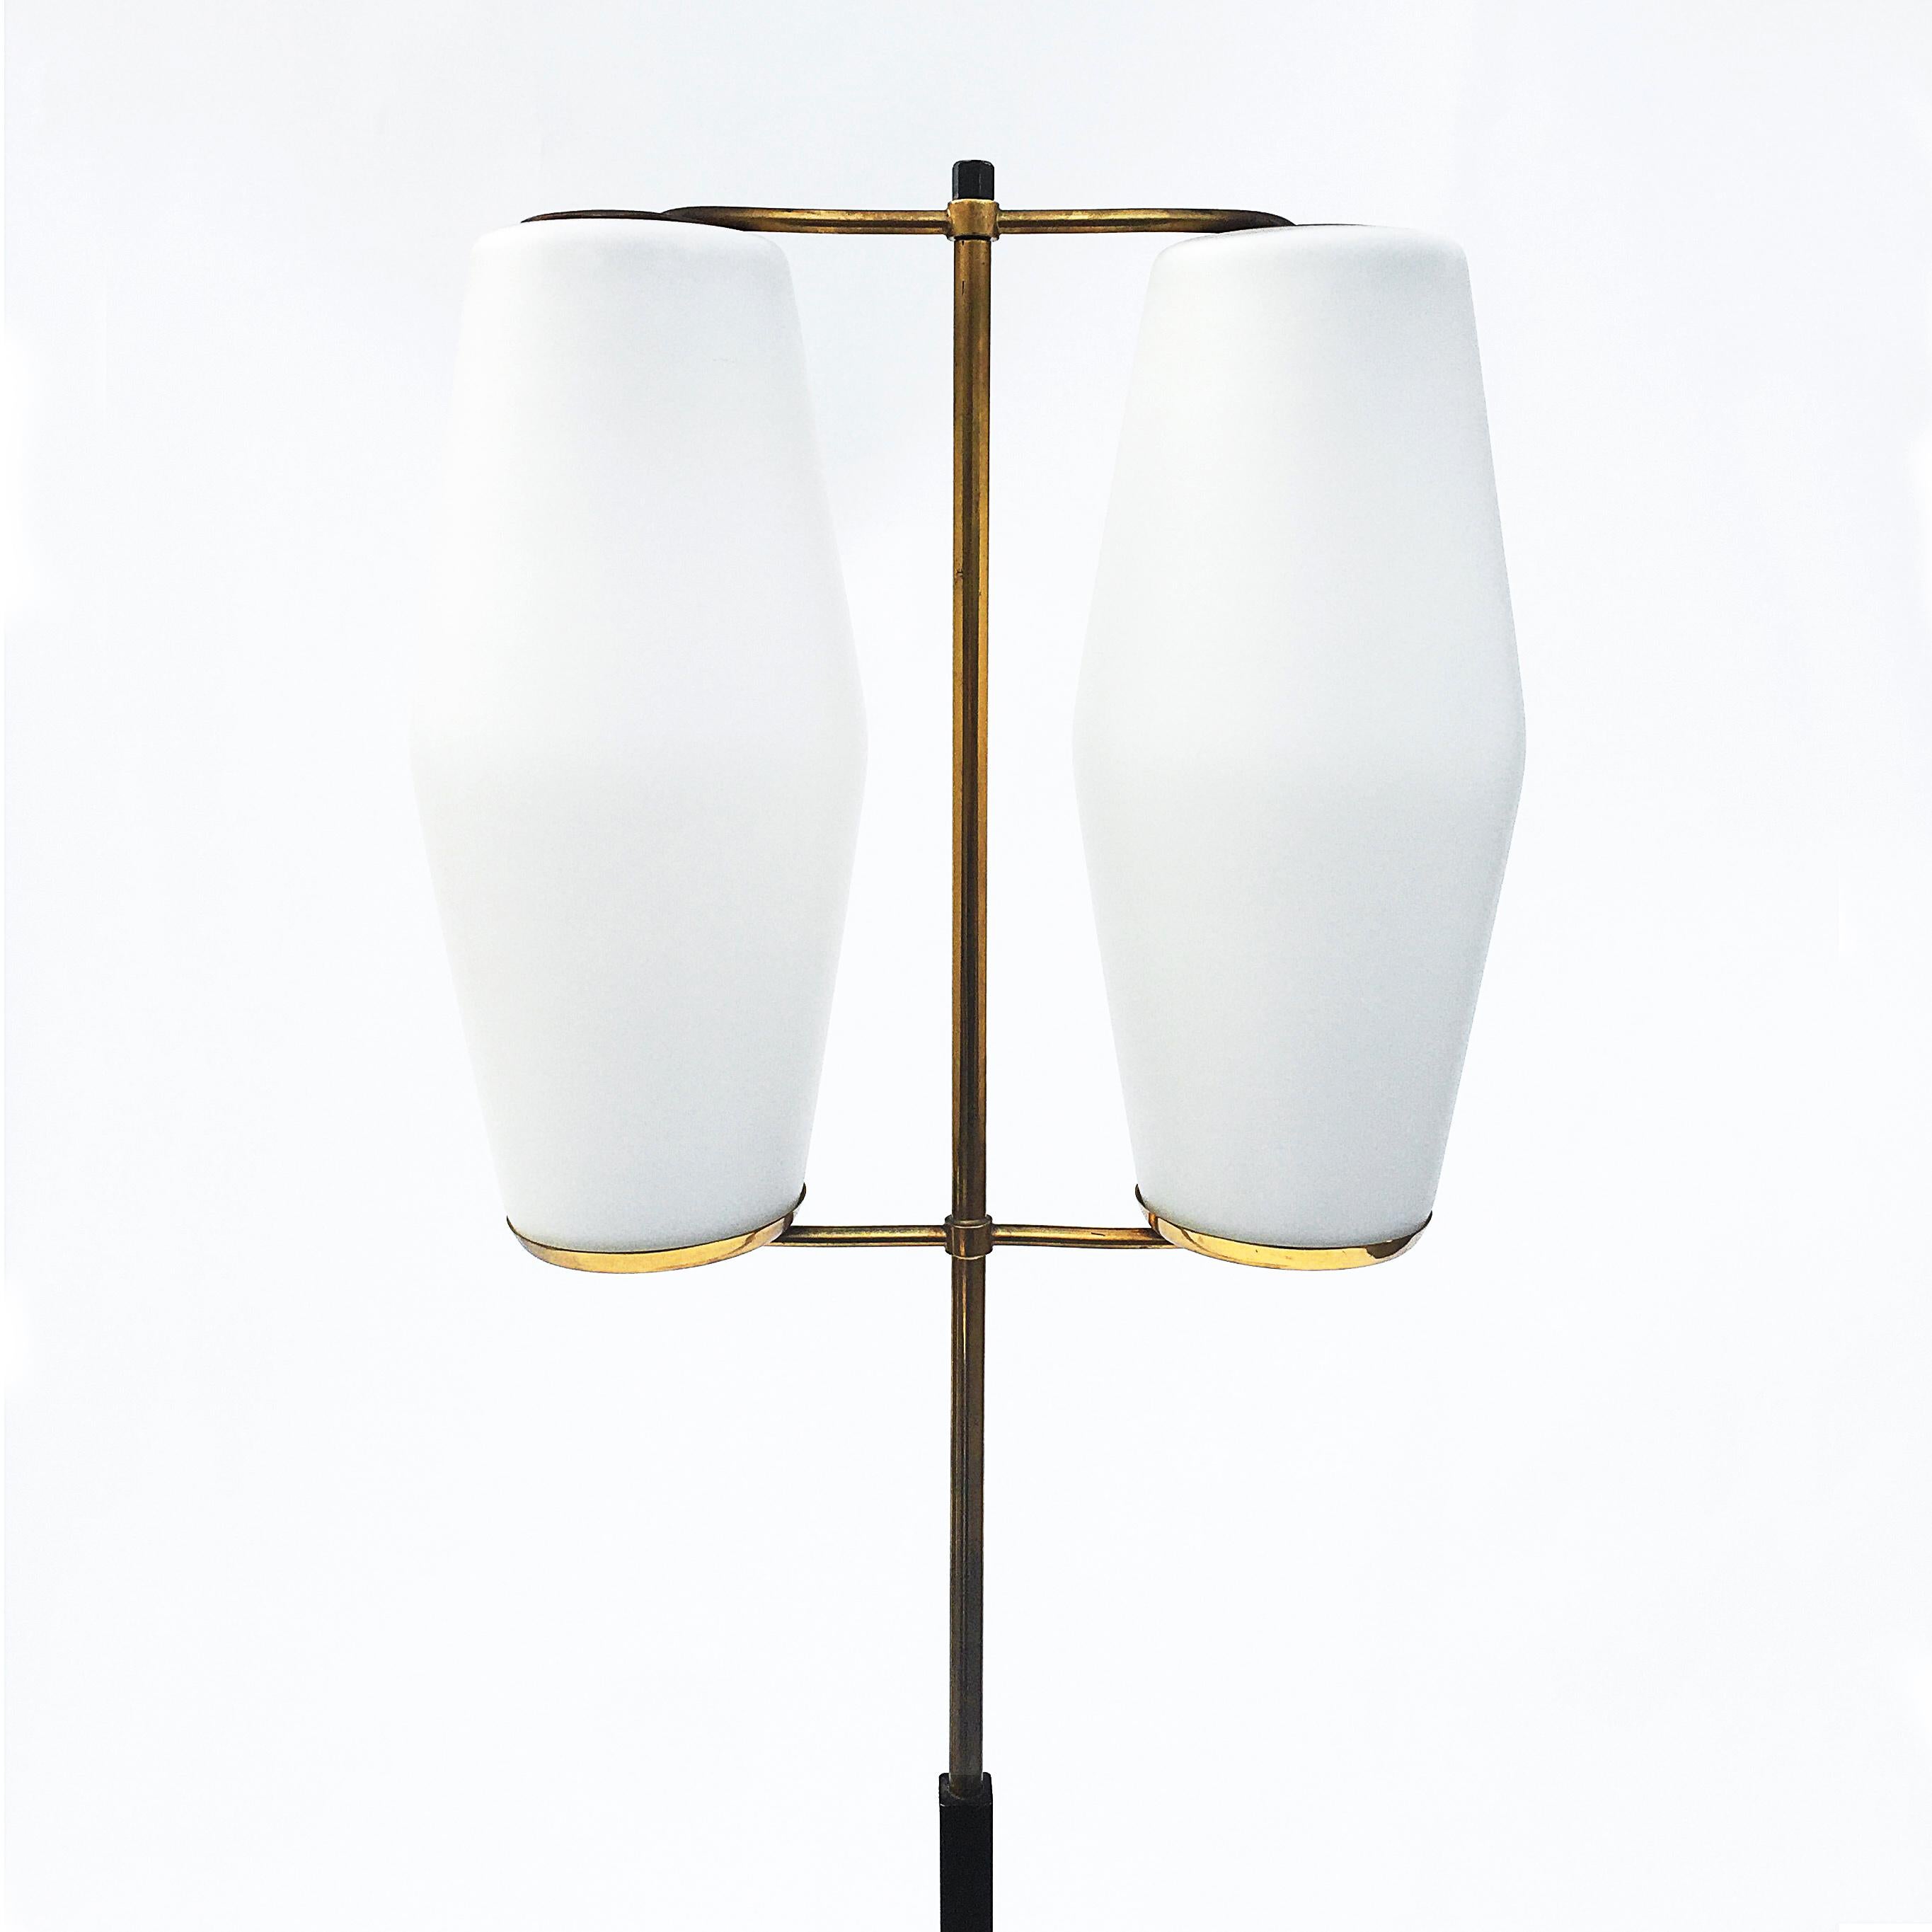 Stilnovo floor lamp on black enamelled pole and marble base supporting in brass finishing’s two frosted white shades.